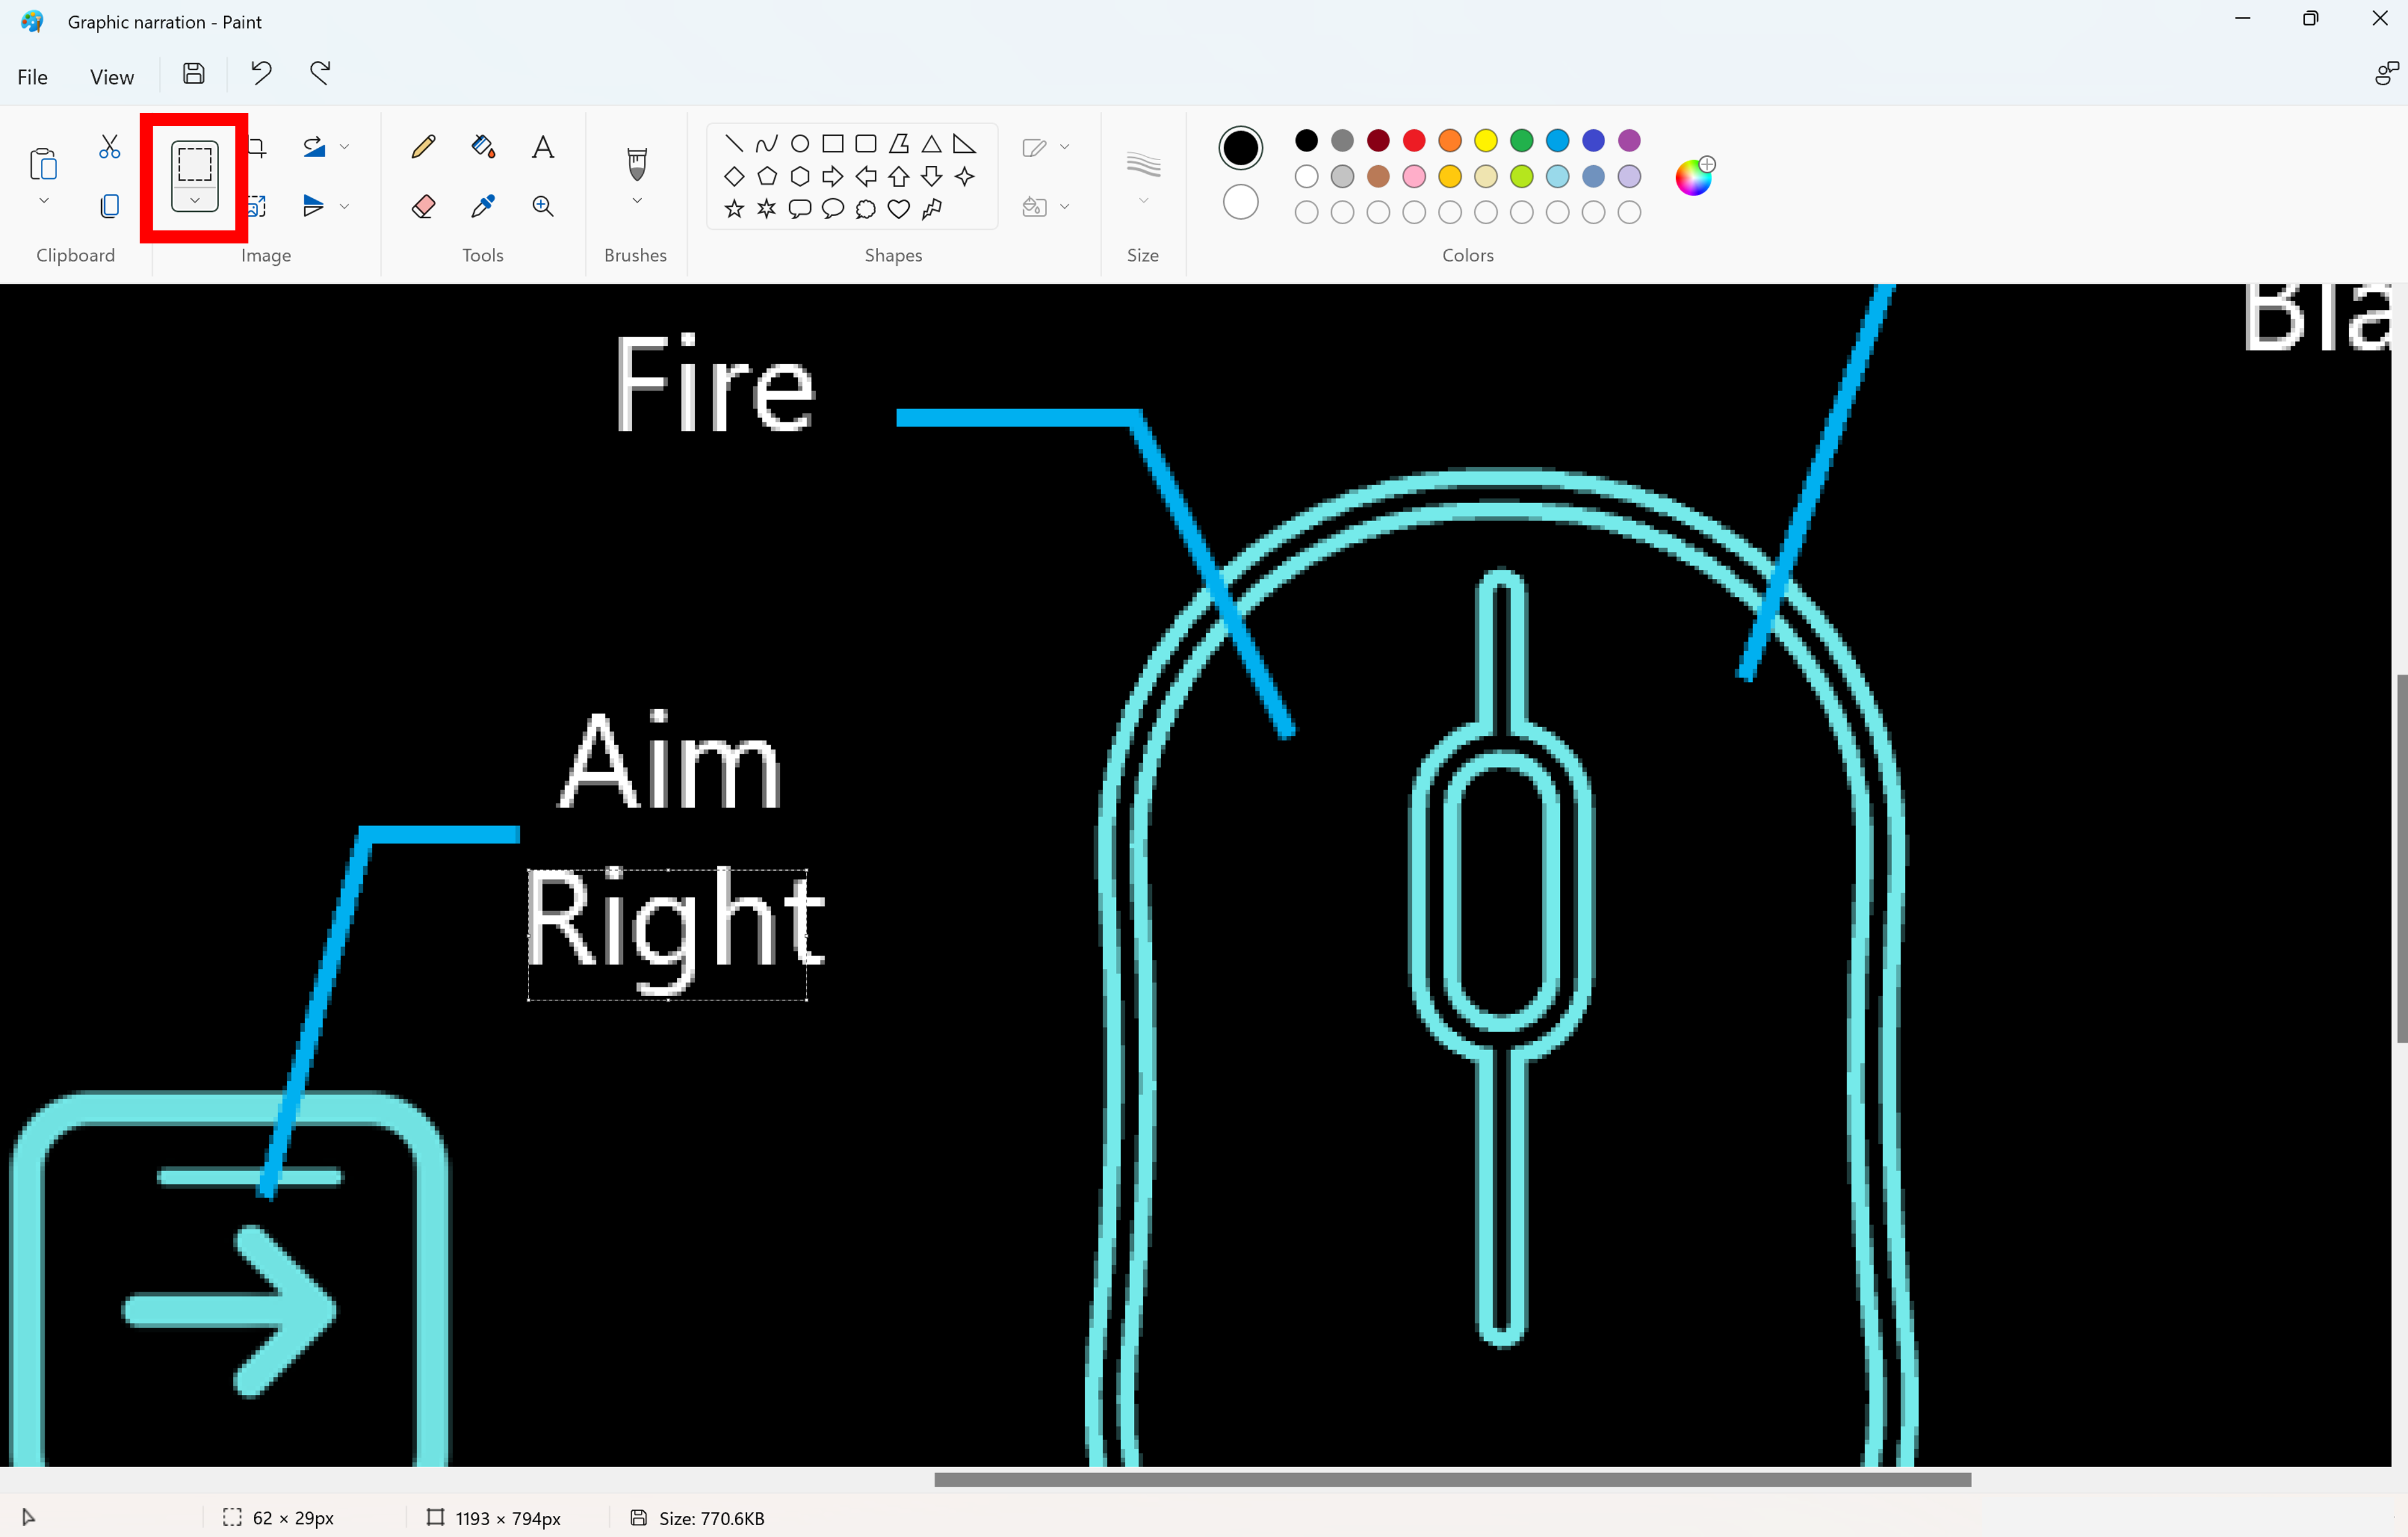 Screenshot of Windows Paint app with highlight over the app's Select tool. Using the tool, a rectangular box is drawn over the word "Right" in an image so that edges of the word's ascenders and descenders are on the box's top and bottom edges, respectively. 